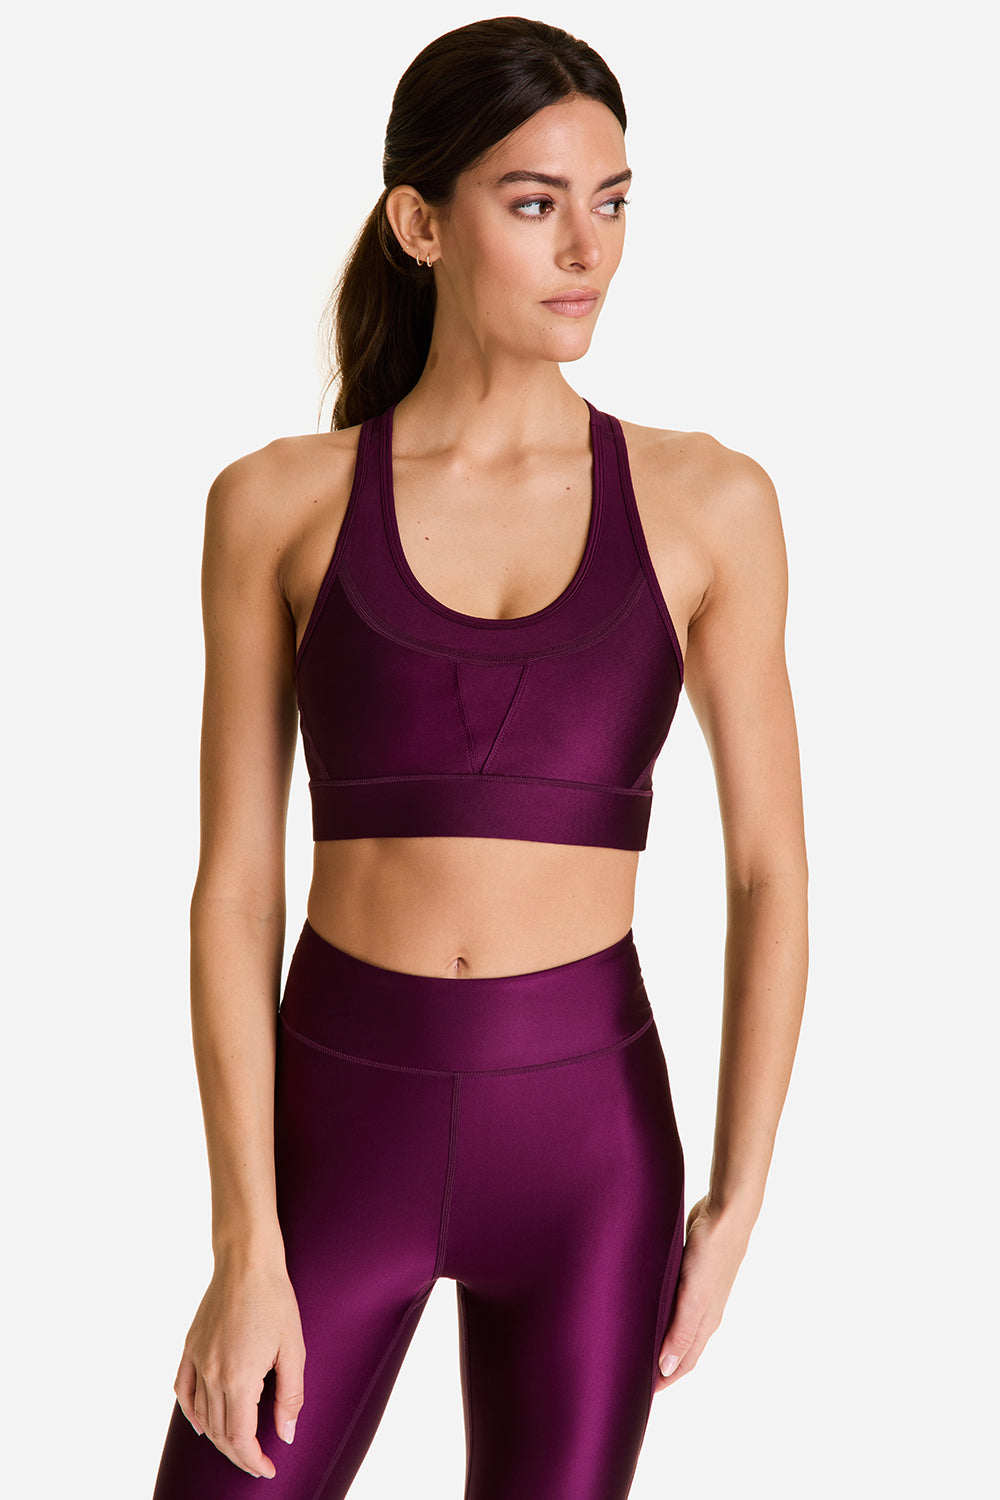 I really need sizing help from you guys! The Energy Bra Medium Support B-D  Cups I wear a bra size 32DD, and I have always worn size 6 lululemon  bras/tops. But some